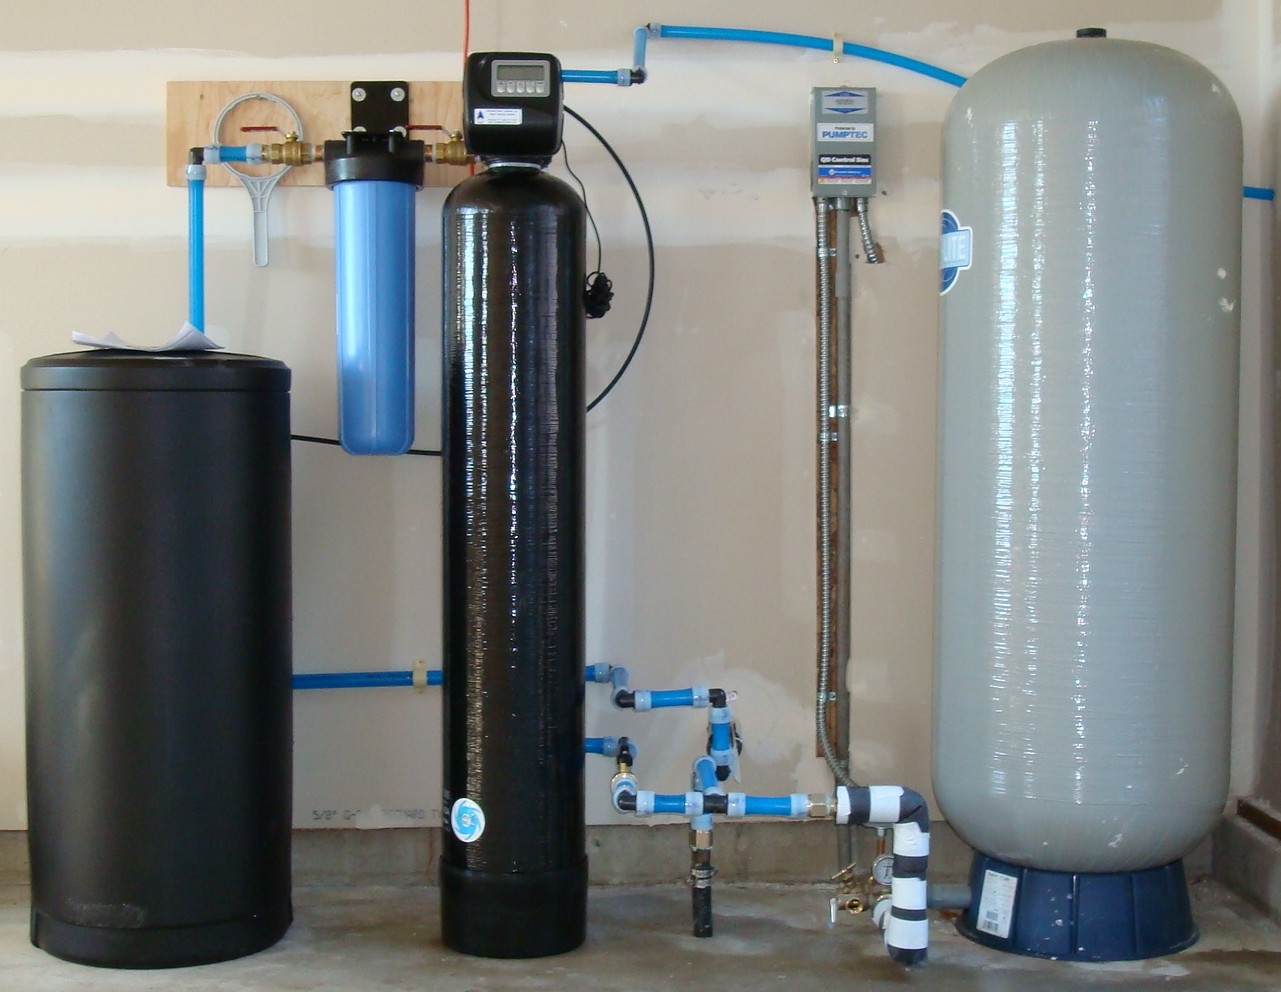 Whole house well water softener with carbon post filter.